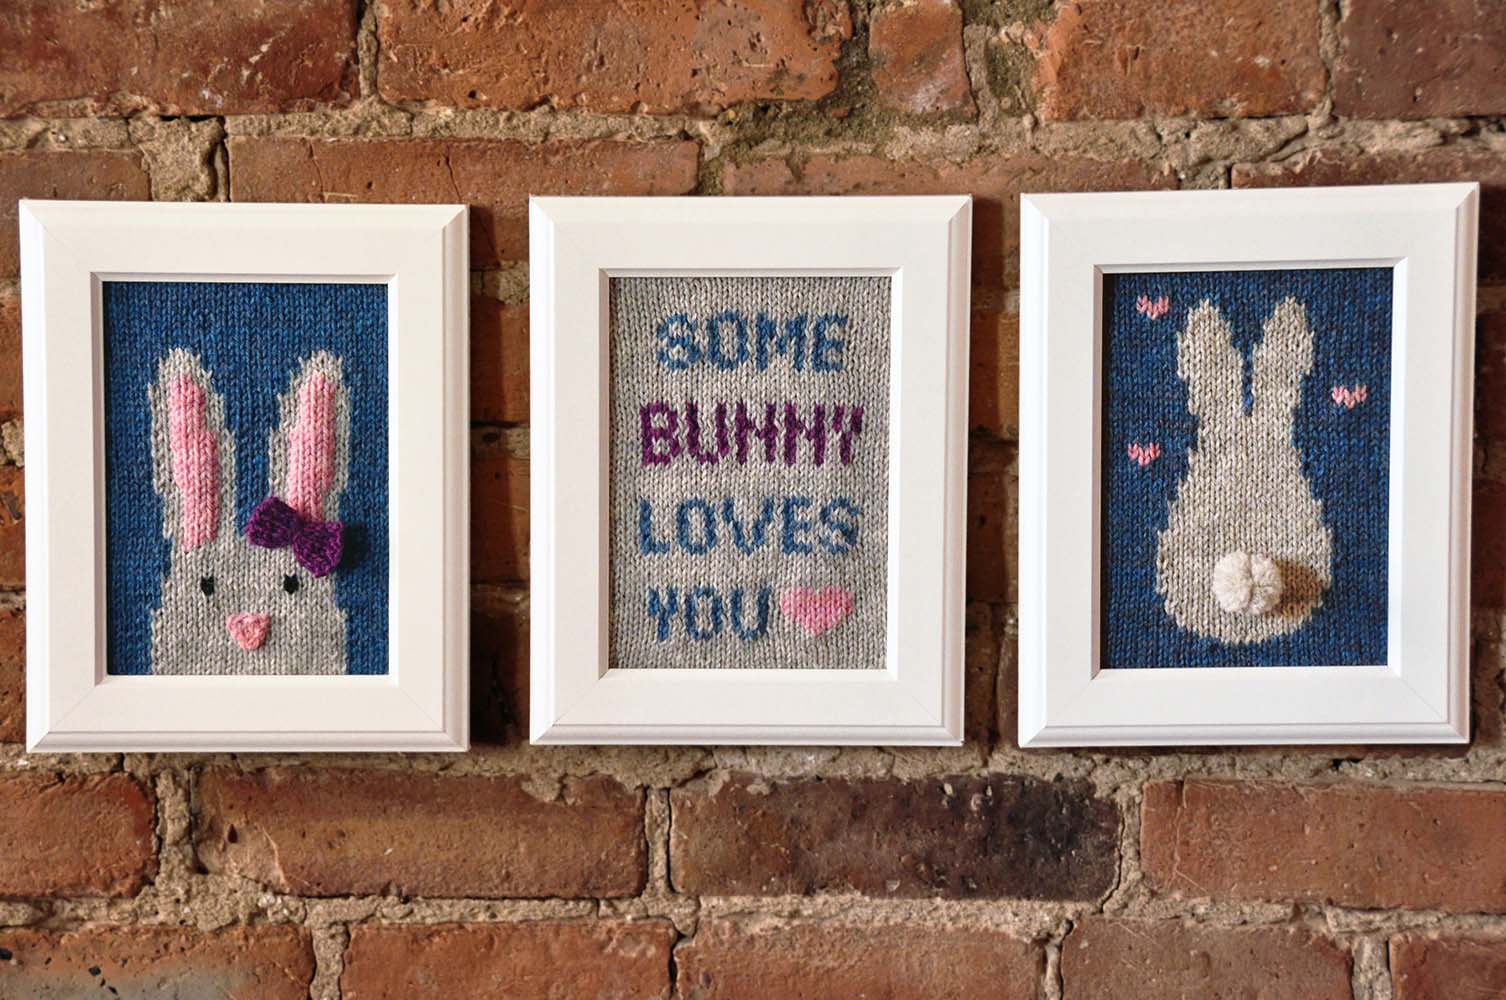 “Some Bunny Loves You” Knitted Wall Art